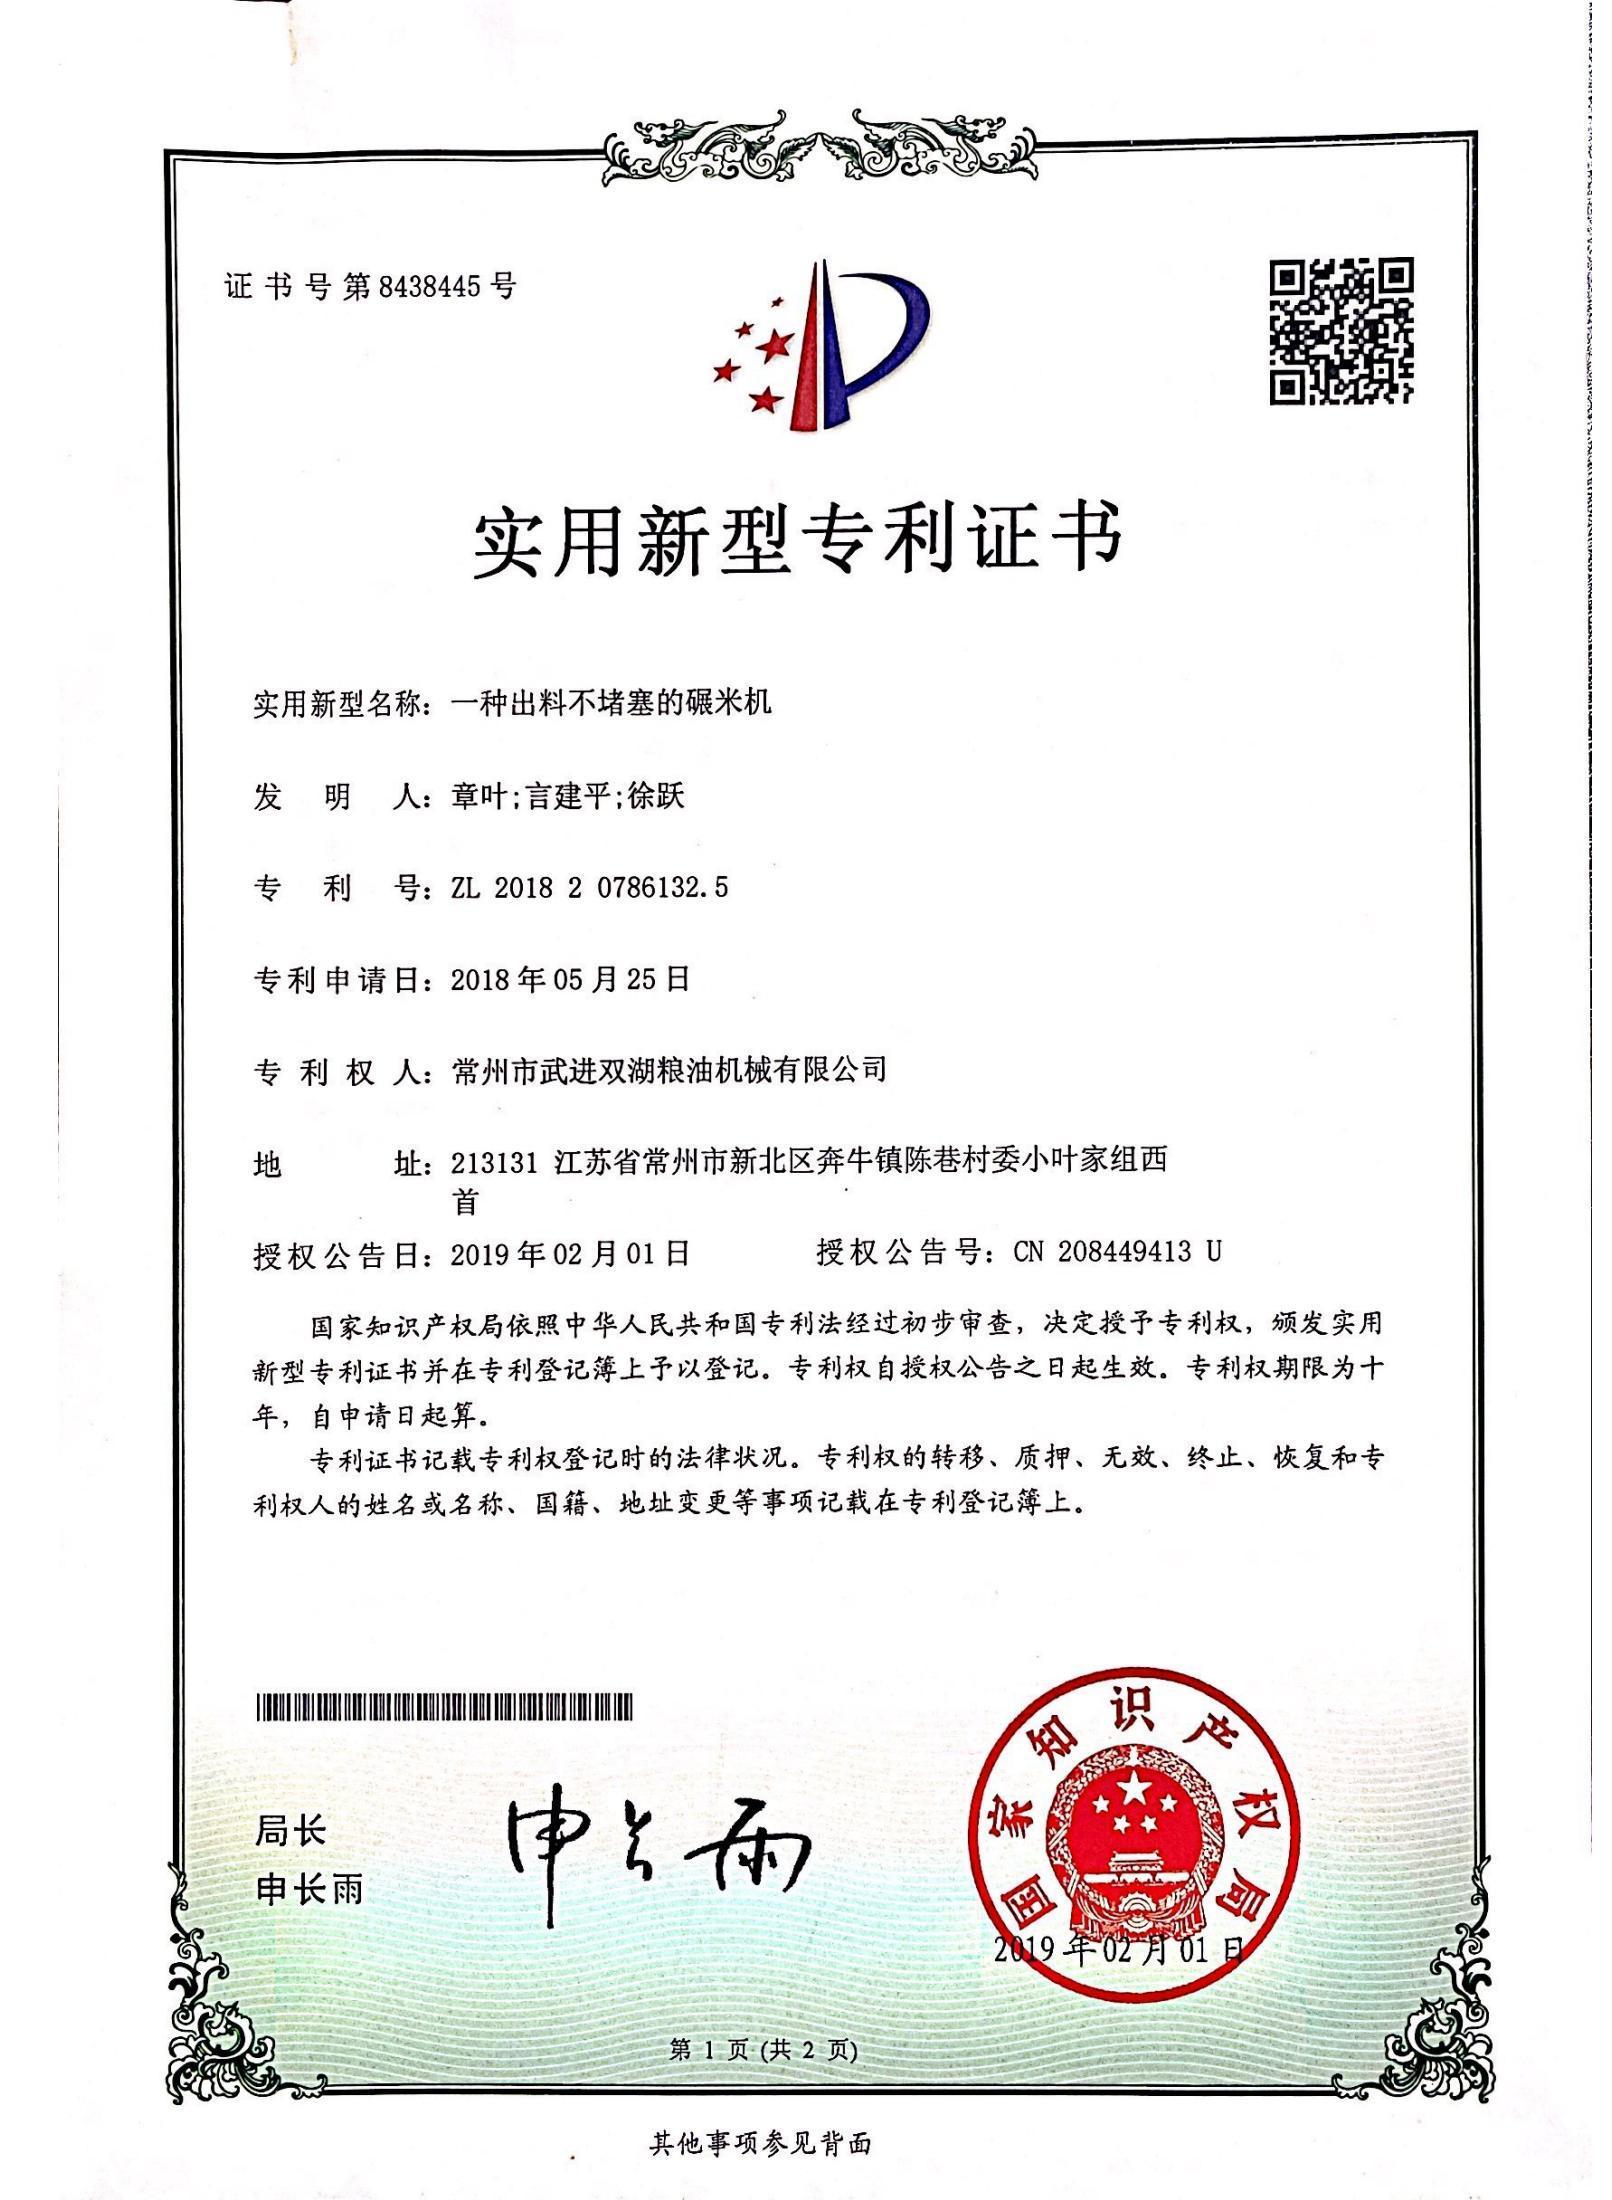 Patent certificate of rice mill with non-clogging discharge